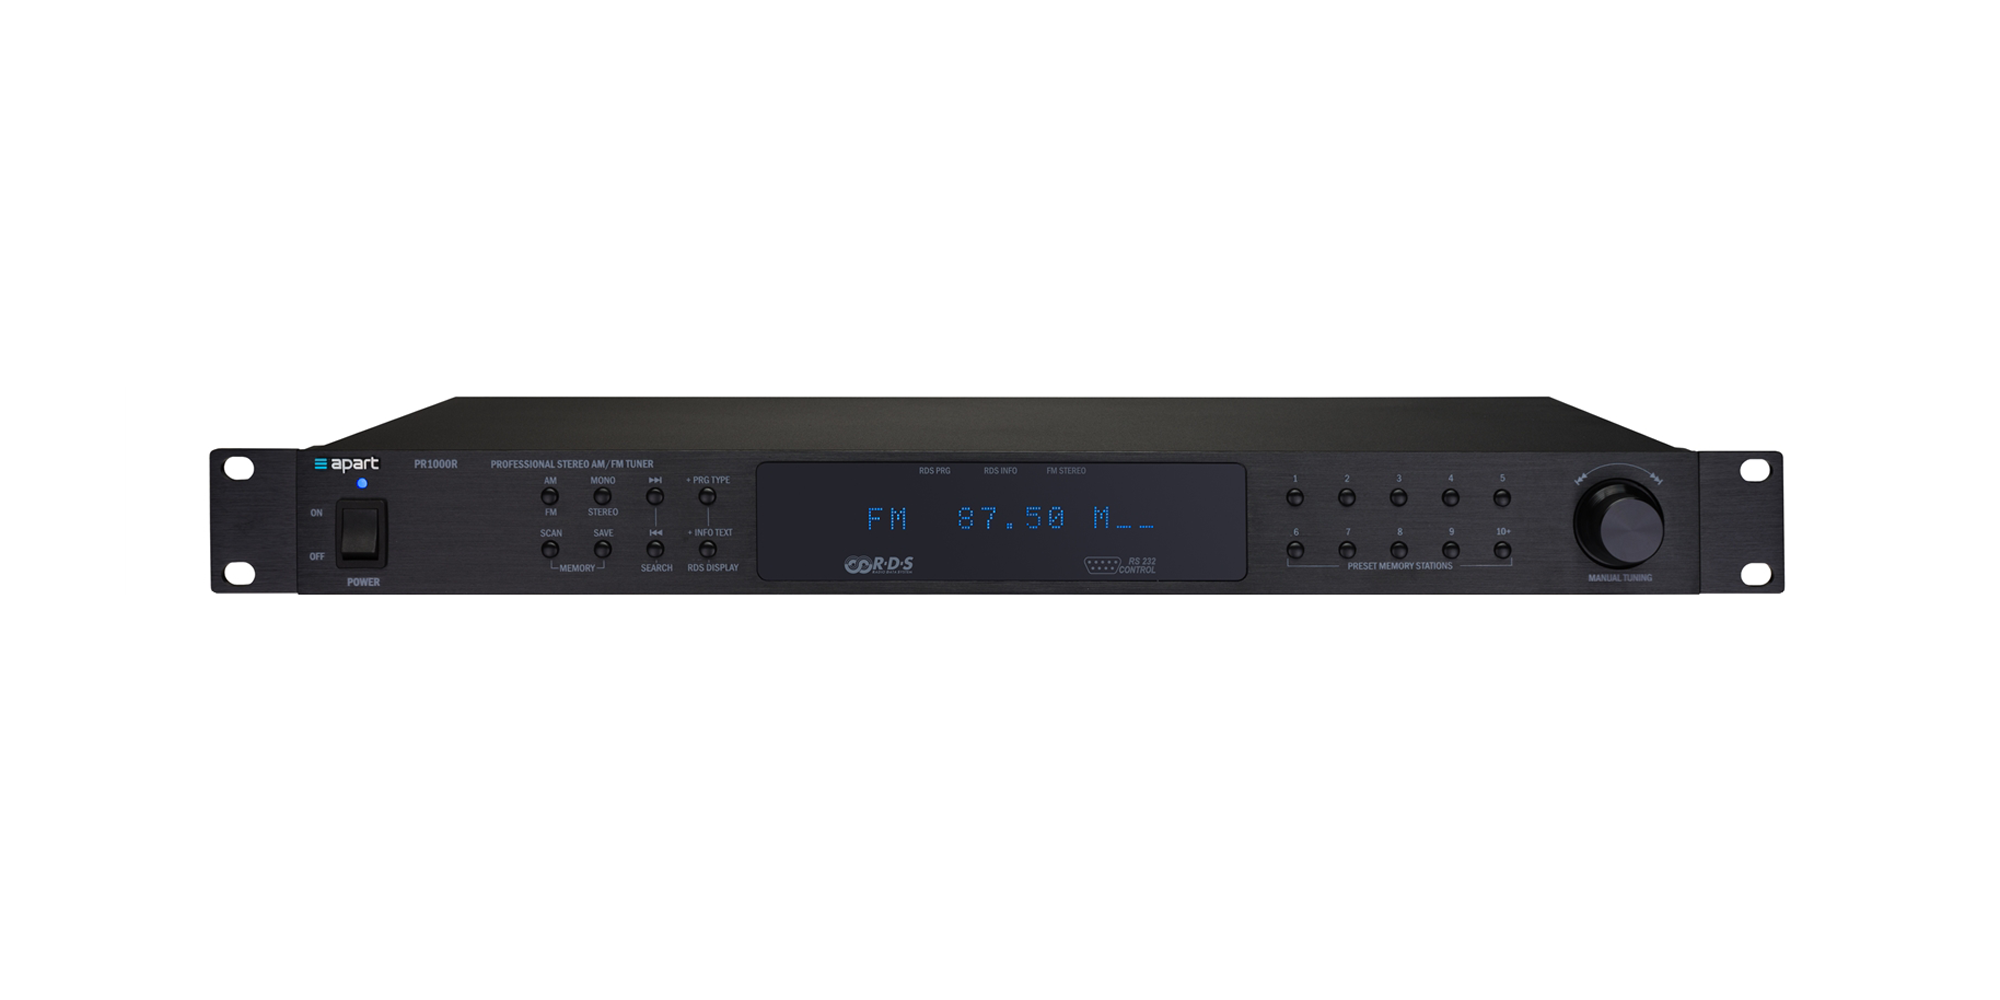 PR1000R AM/FM RDS tuner controllable via RS232 or infrared